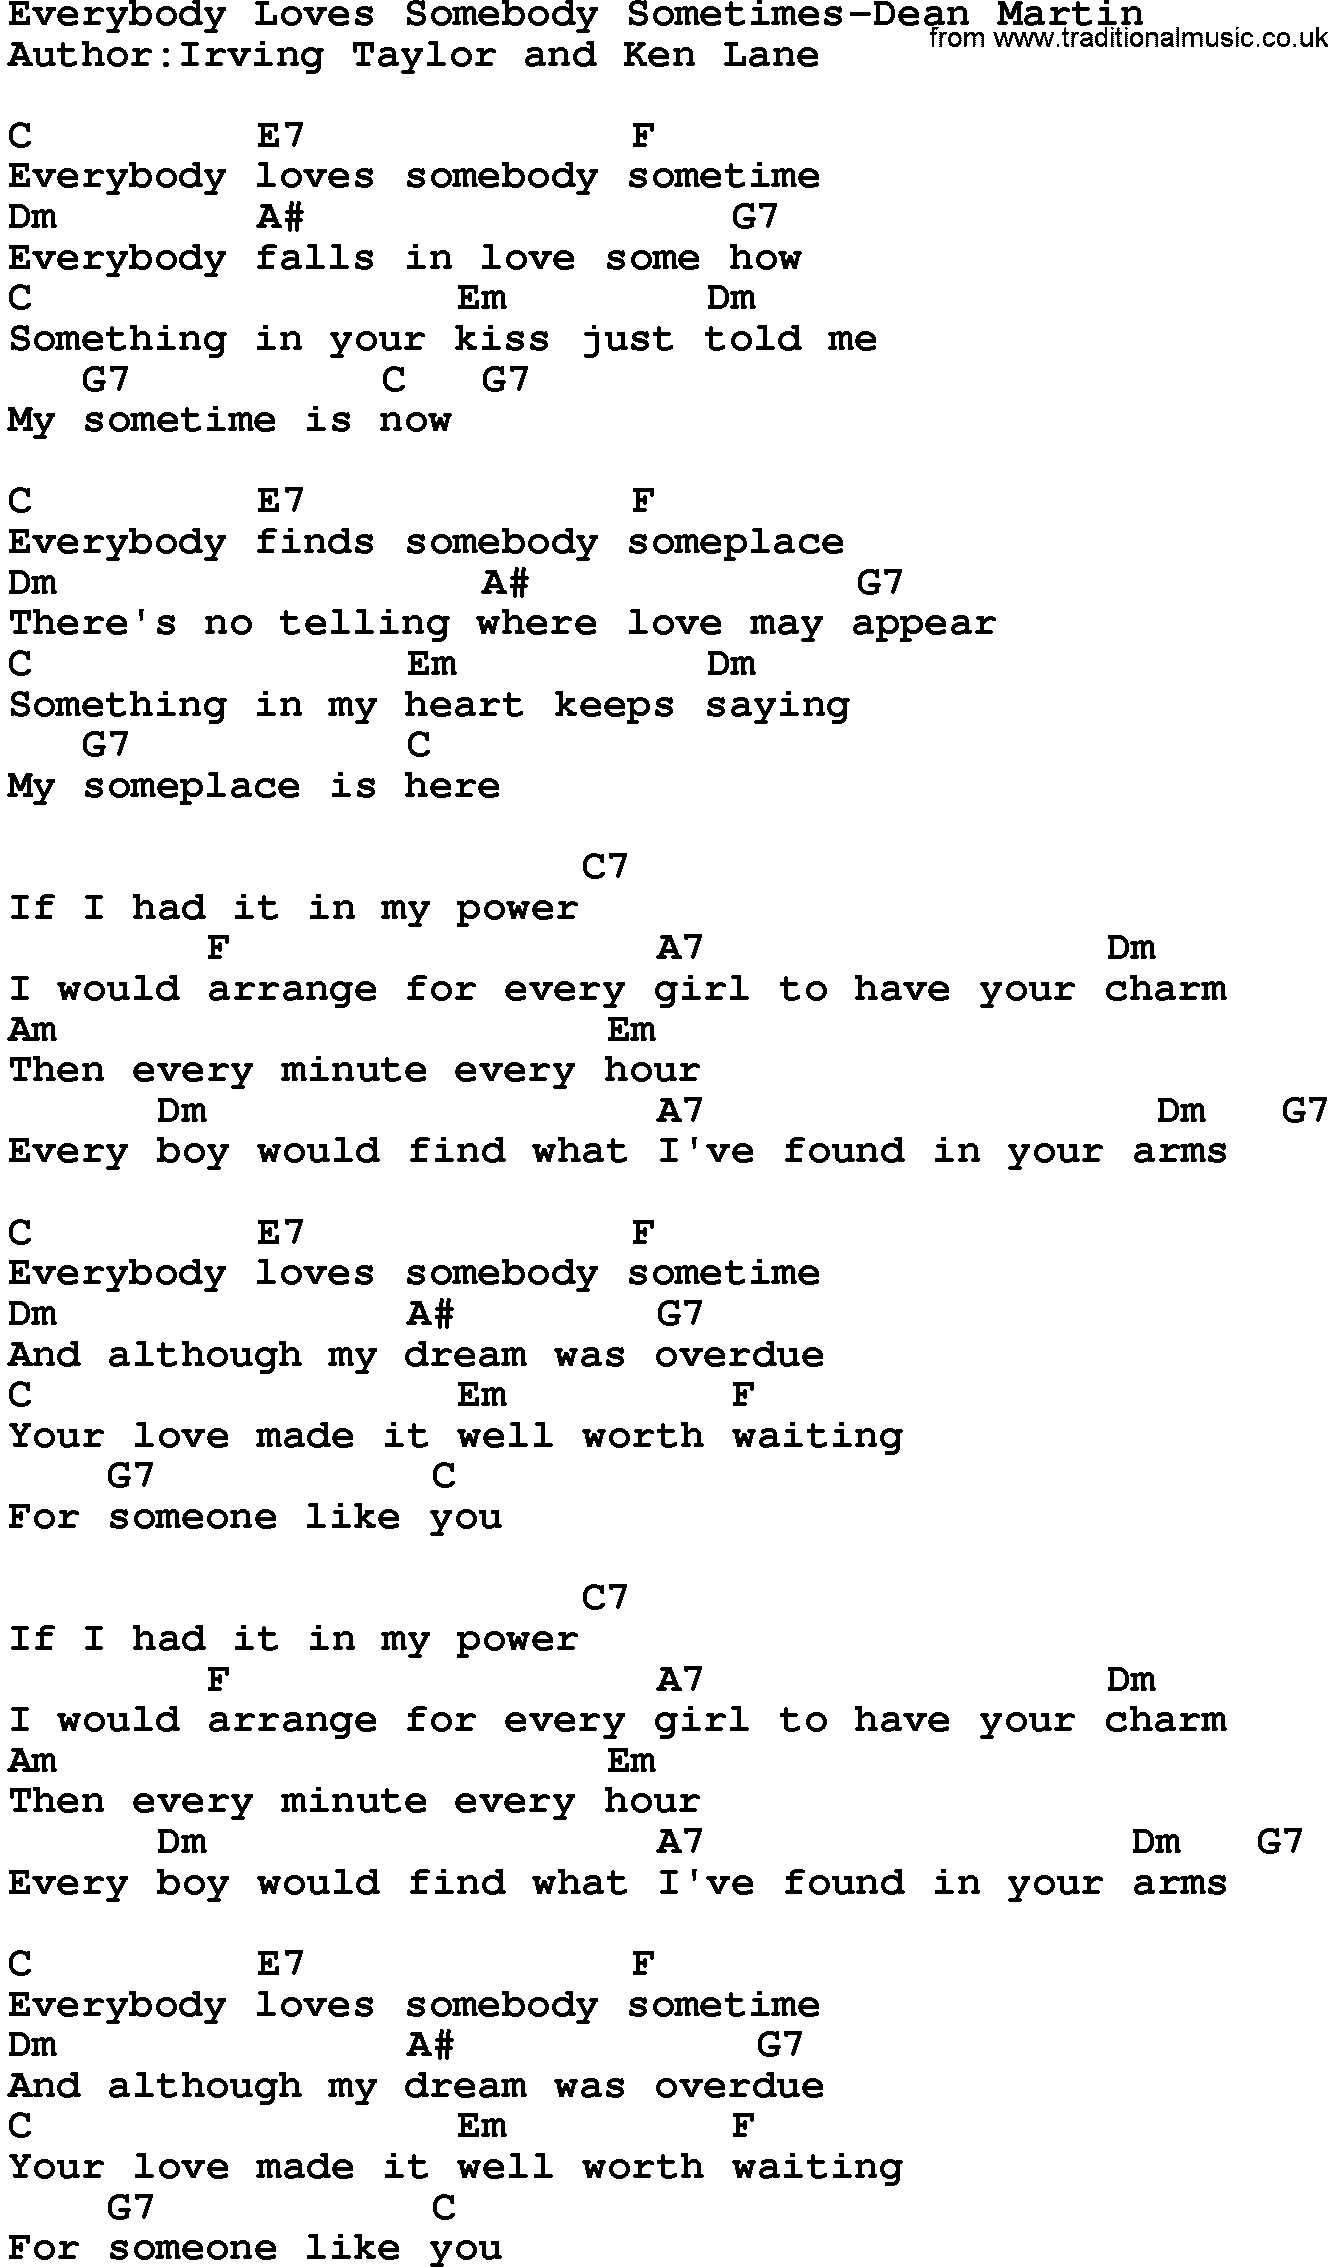 Country music song: Everybody Loves Somebody Sometimes-Dean Martin lyrics and chords